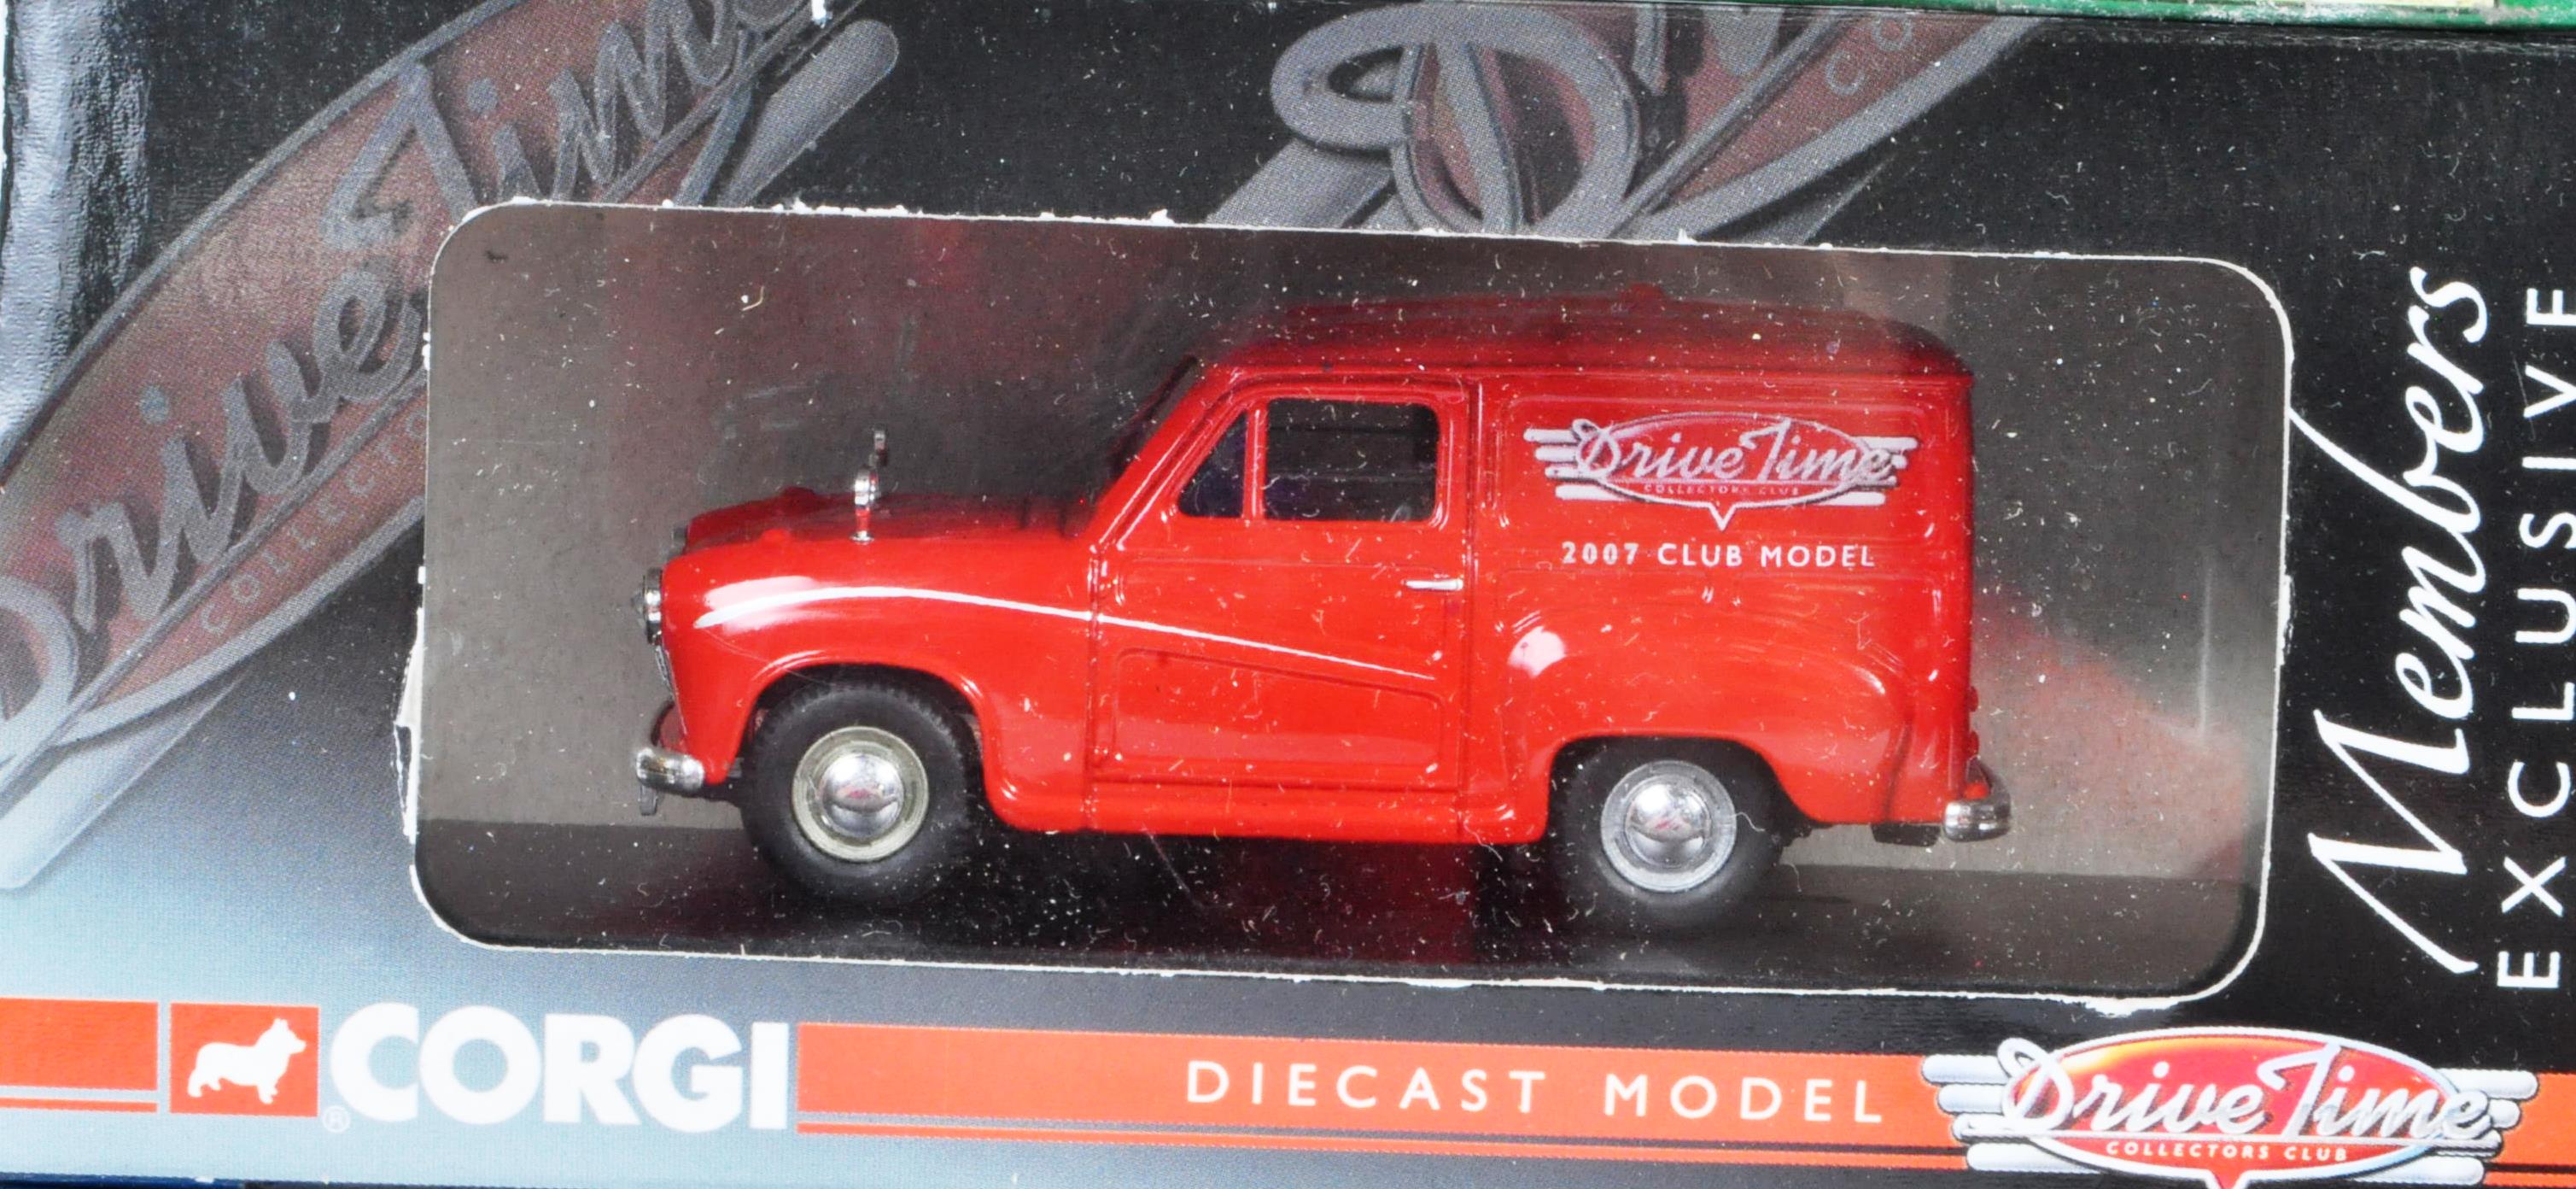 COLLECTION OF CORGI MADE DIECAST MODEL VEHICLES - Image 3 of 8